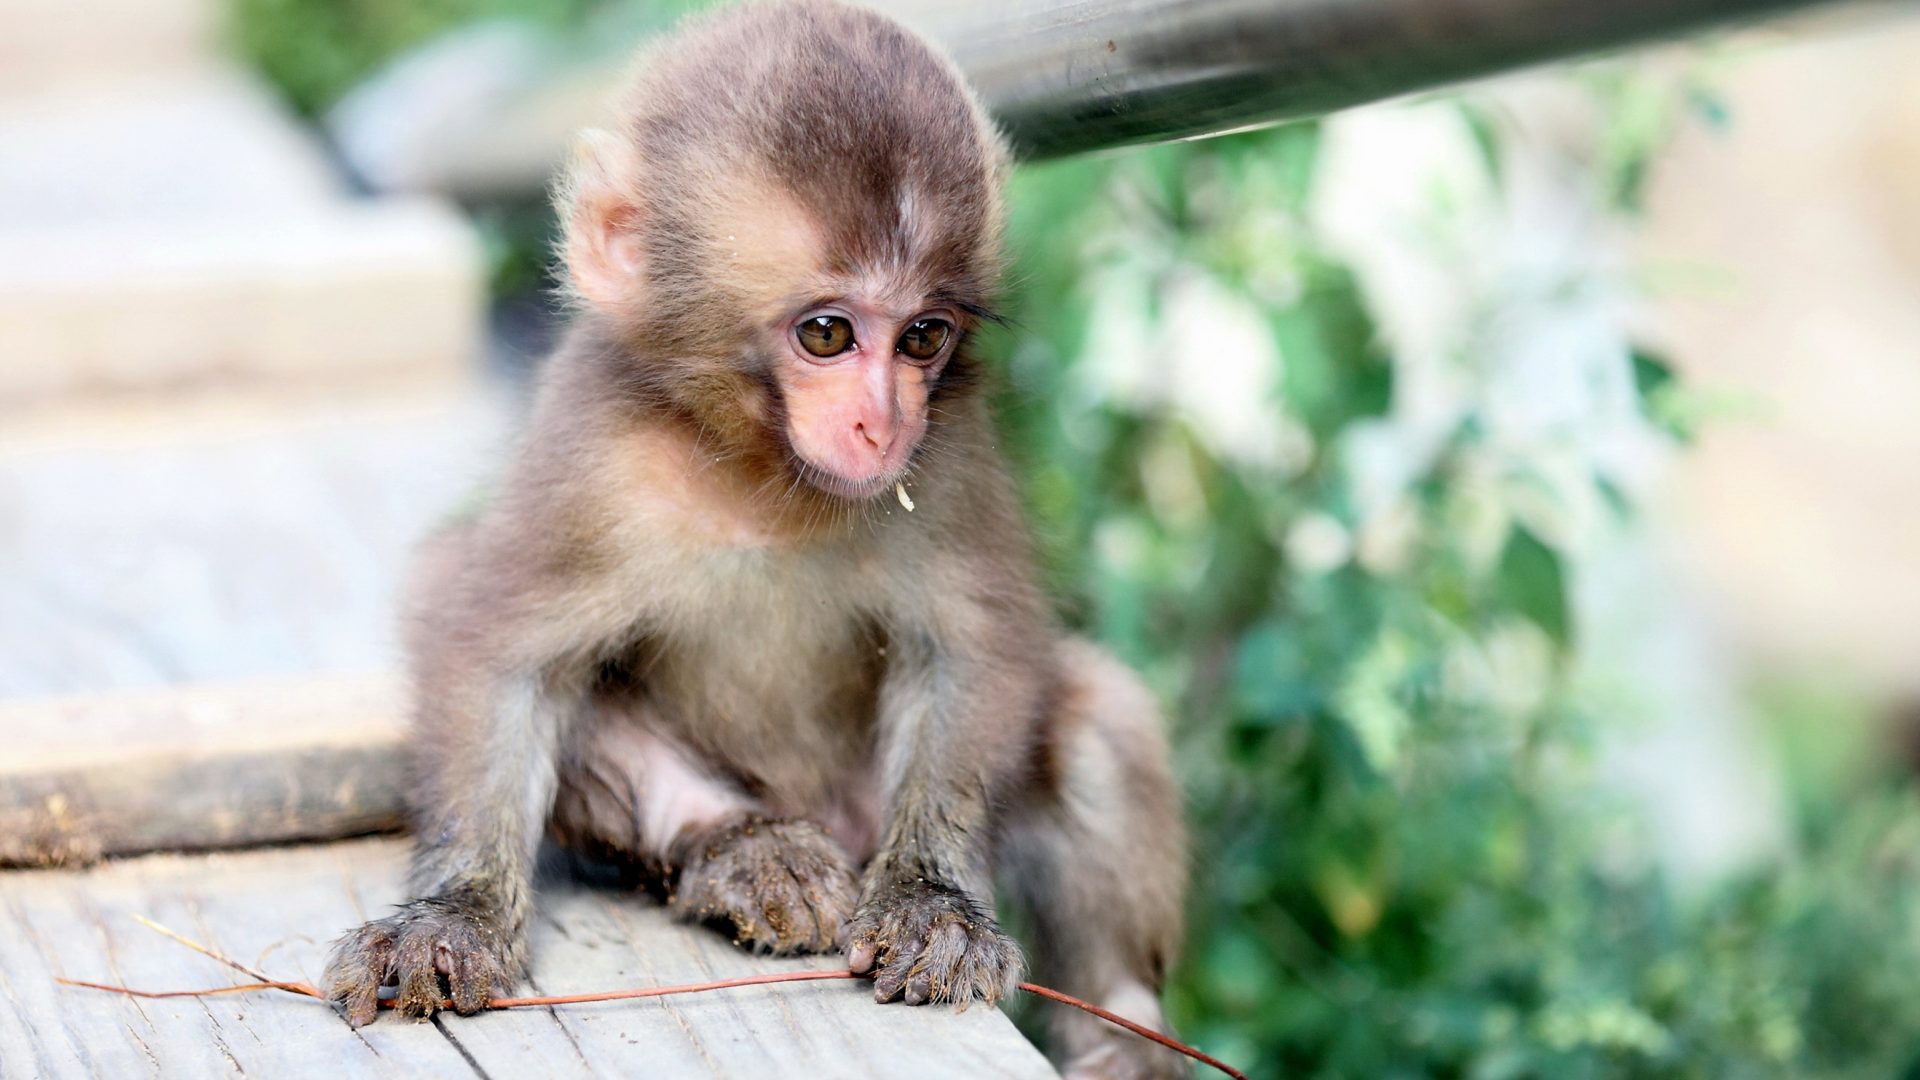 Small Cute Monkey Hd Wallpapers For Mobile Phones And